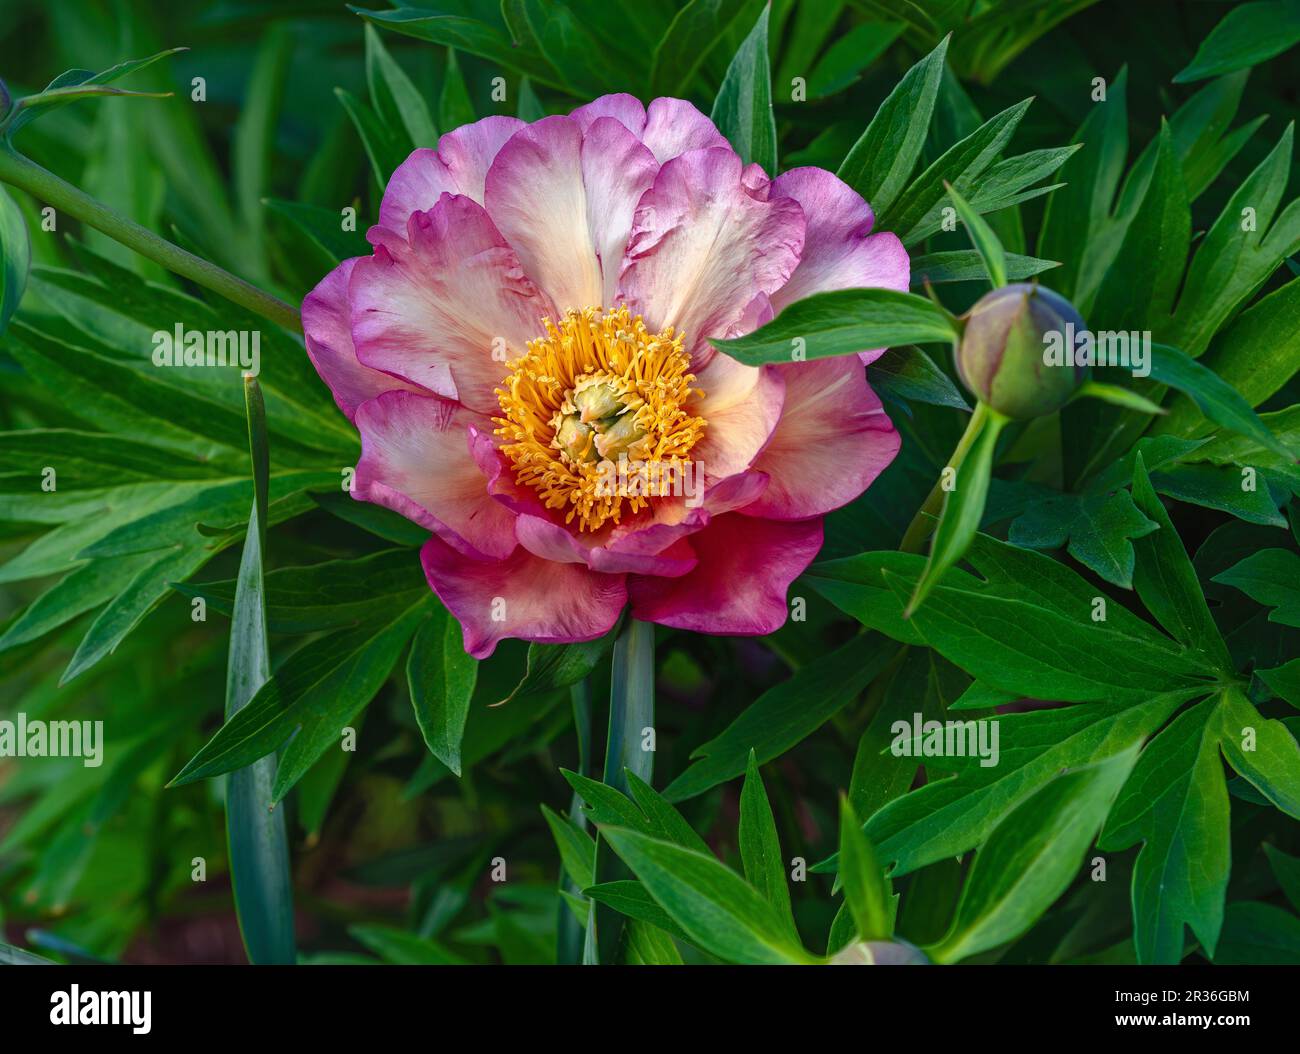 A beautiful Peony bloom in a garden, surrounded by green leaves, and viewed up close with flower core details. Stock Photo